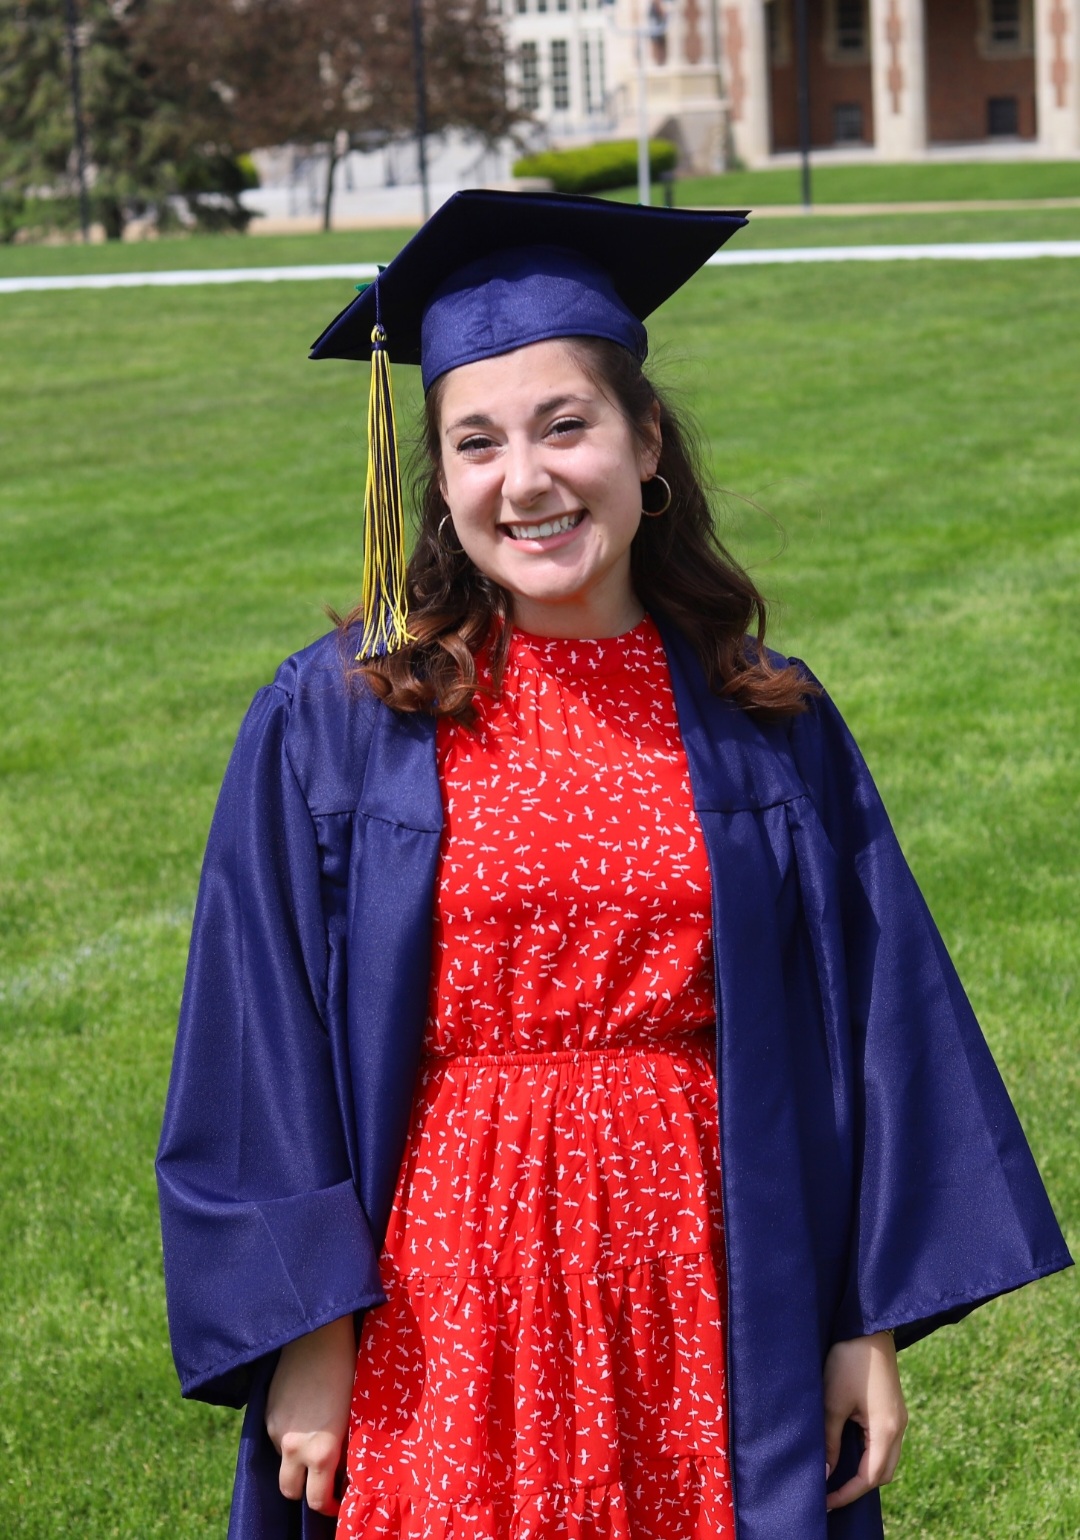 Ava Minutello, a new Latin teacher at McLean High School, graduated from John Carroll University in 2021 with a degree in classical languages.